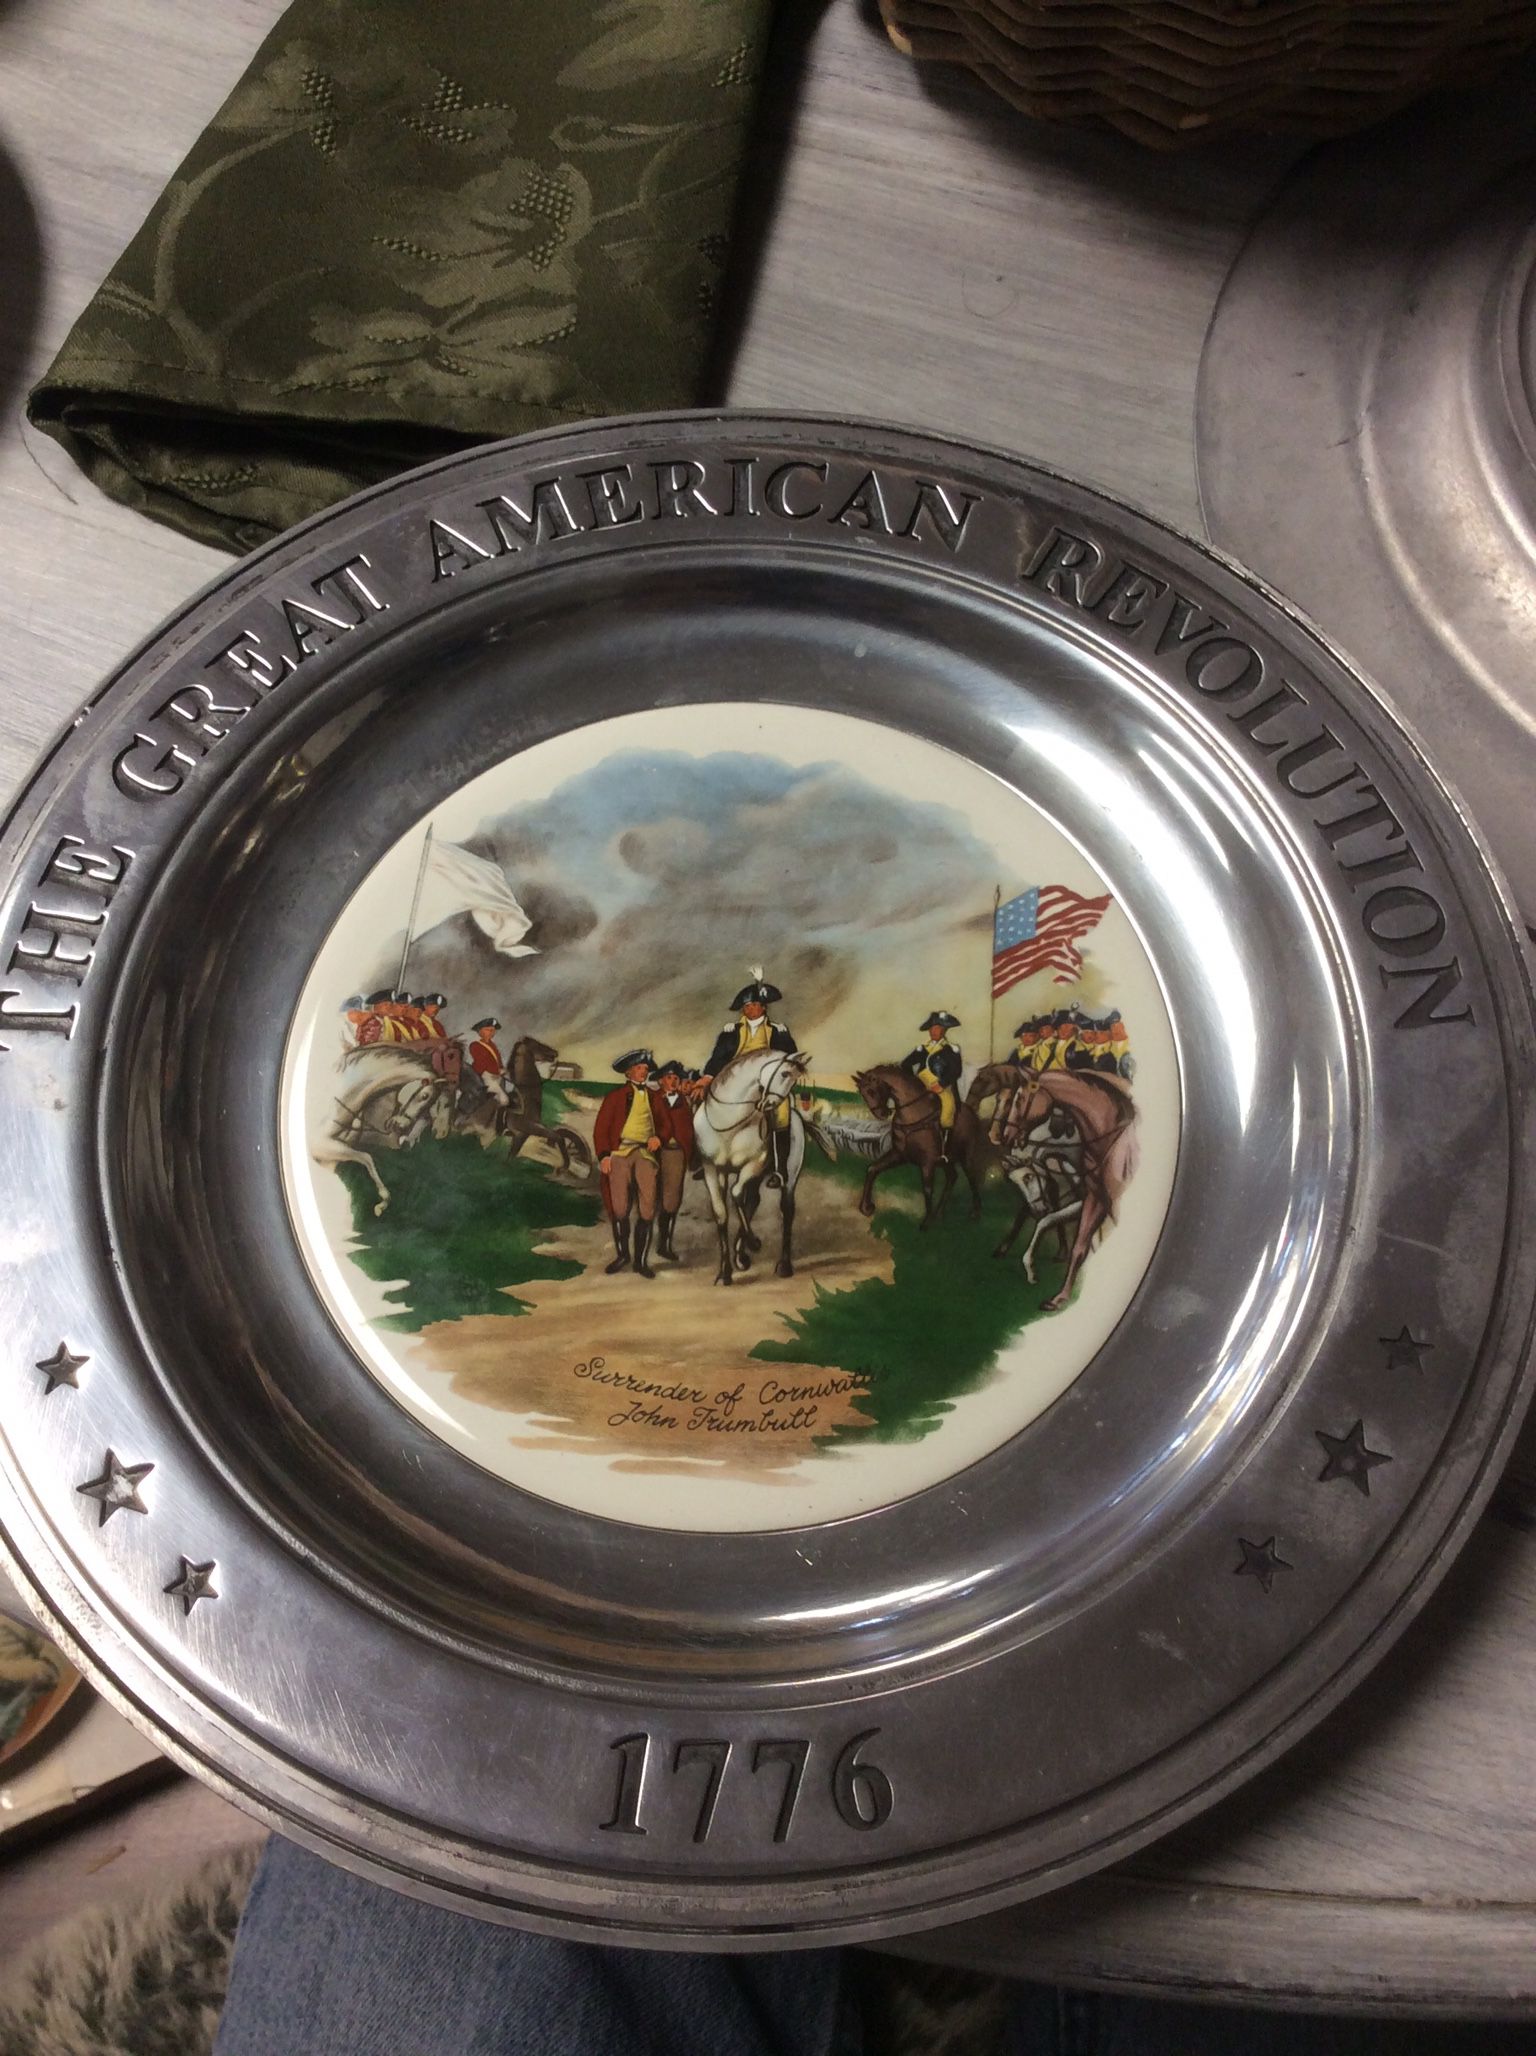 The Great American Revolution 1776 “Surrender Of Cornwall” John Trumbull Pewter Plate